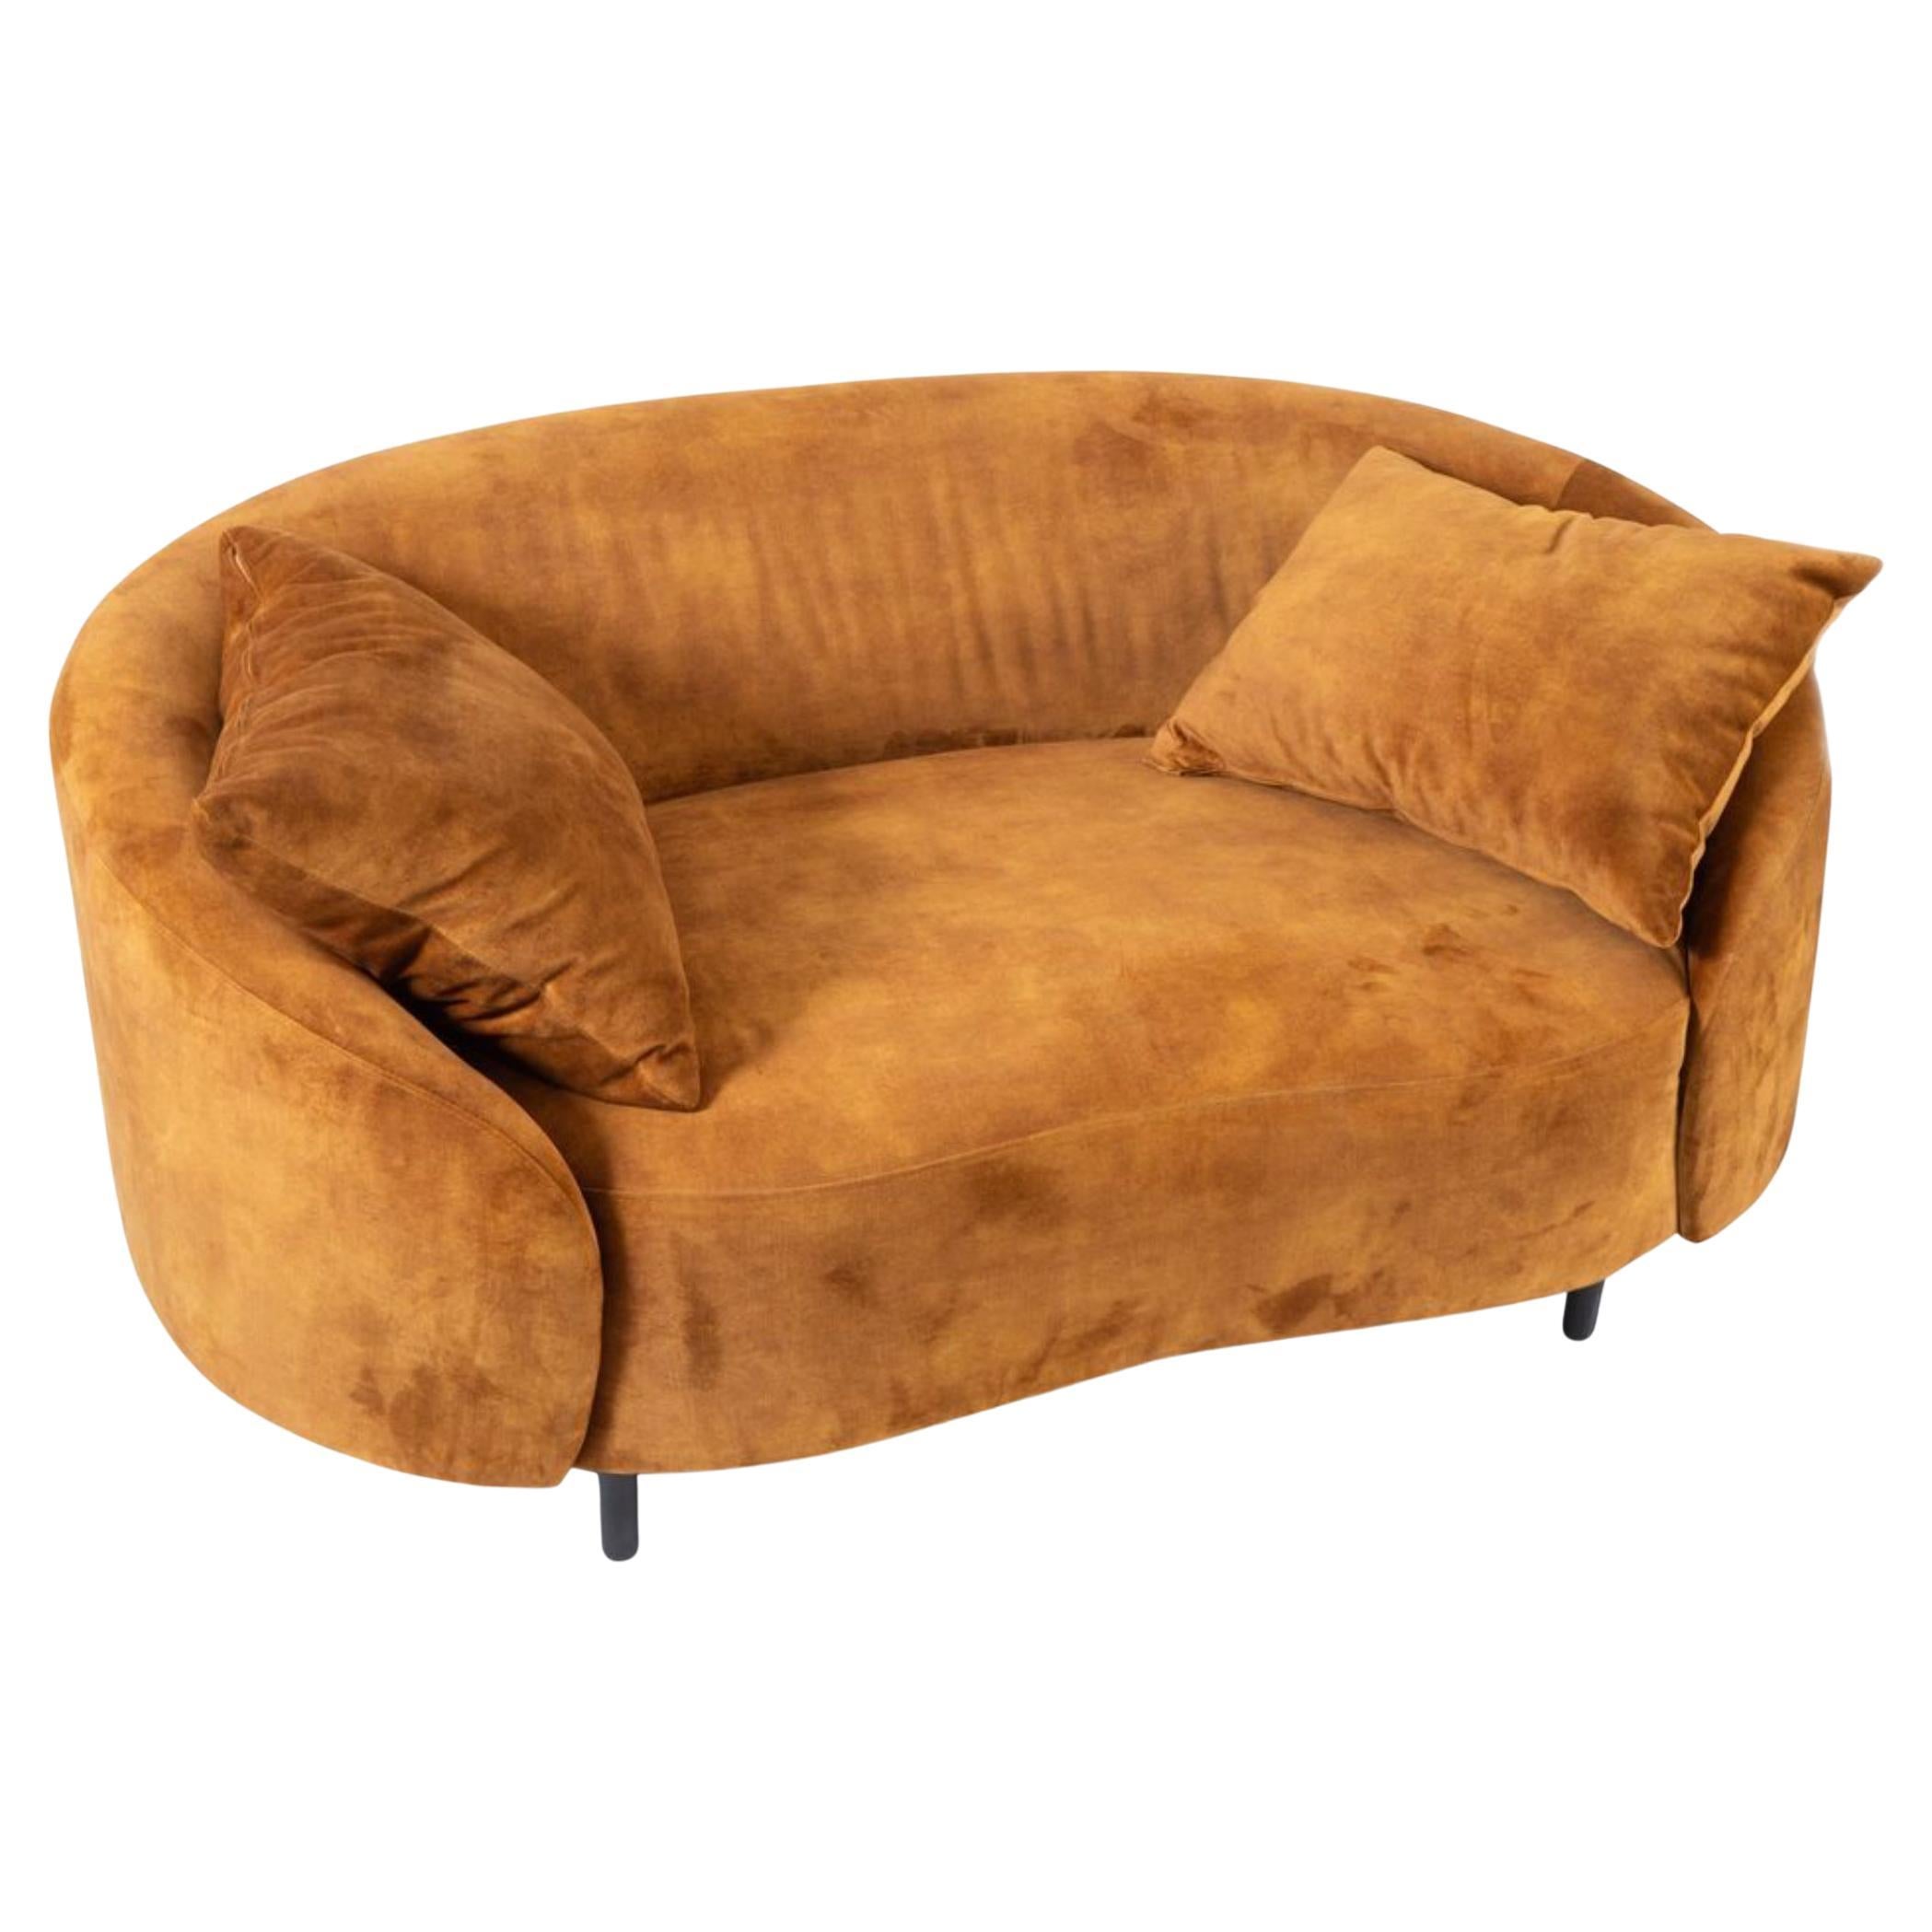 Italian Oval Canapé Wooden Frame Upholstered in Fabric by Living Divani